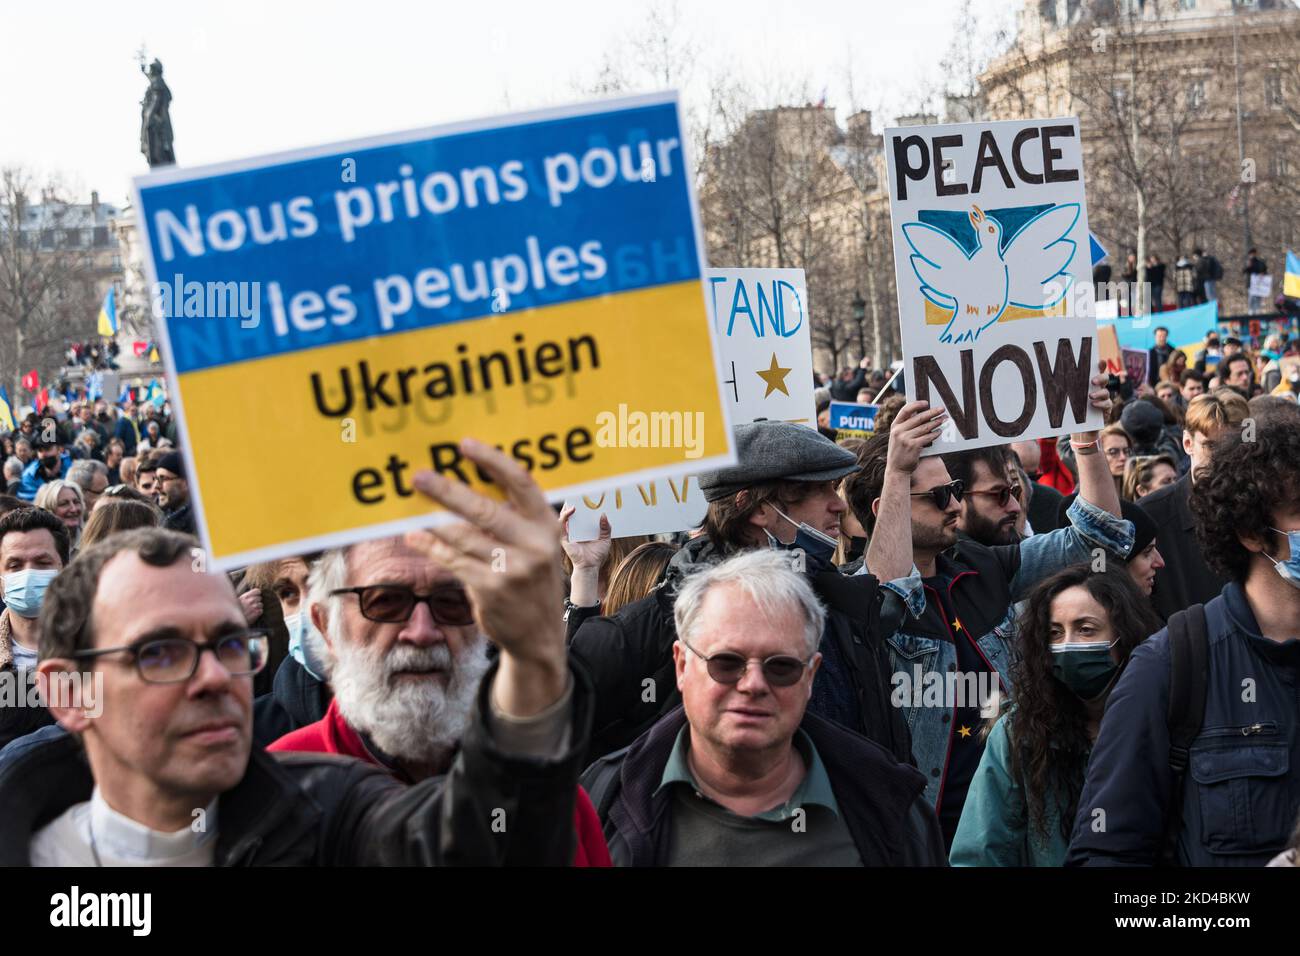 Several thousand people gathered in Paris to participate in a large march from Place de la République to Place de la Bastille to demand peace in Ukraine on the 10th day of the invasion of Russia. Many political figures and ordinary citizens marched amidst Ukrainian flags and slogans for peace and against Putin, in Paris on March 5, 2022. (Photo by Samuel Boivin/NurPhoto) Stock Photo